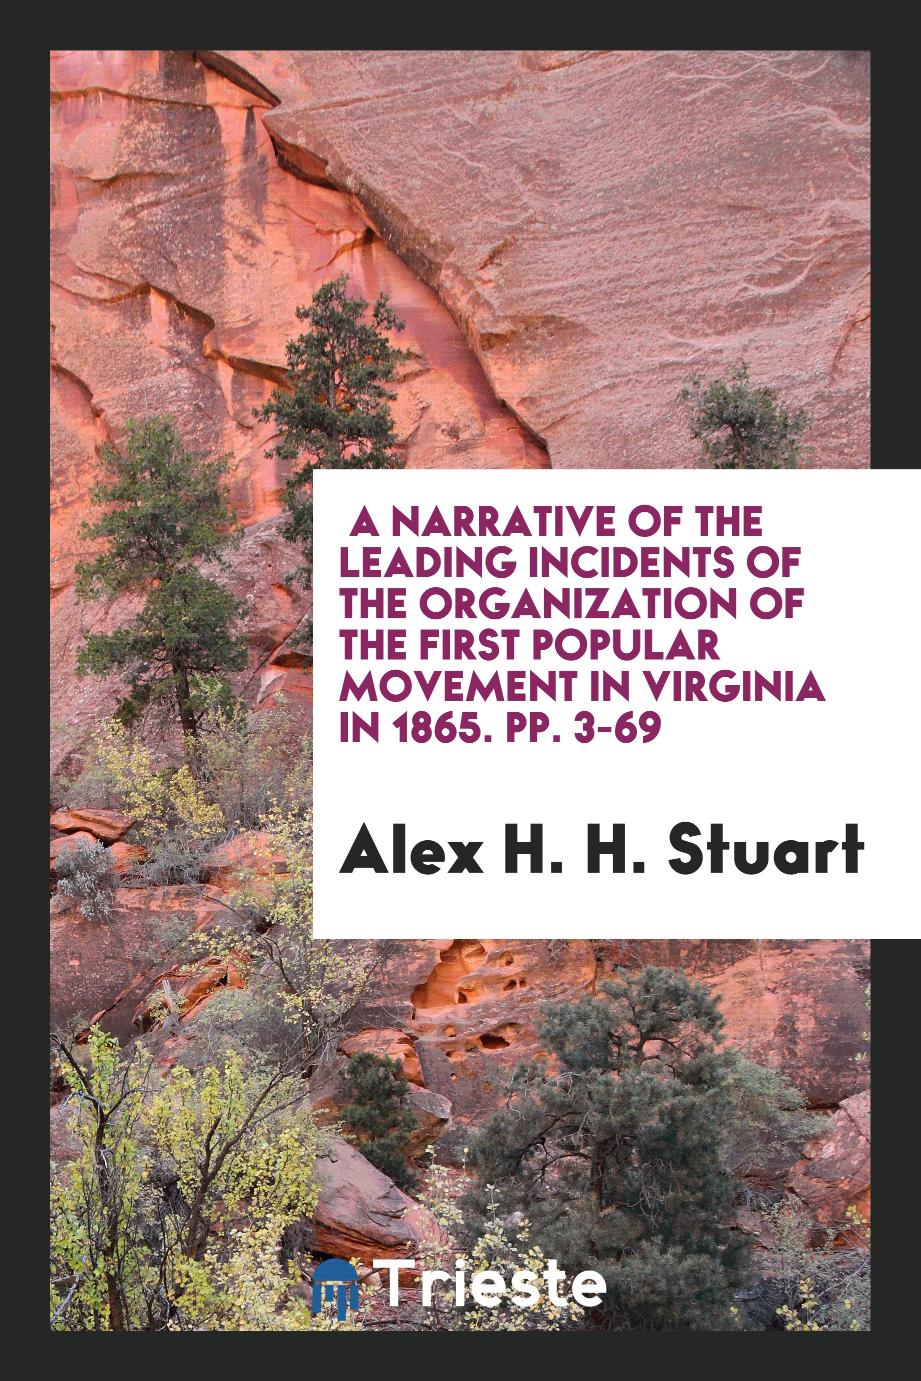 A Narrative of the Leading Incidents of the Organization of the First Popular Movement in Virginia in 1865. pp. 3-69